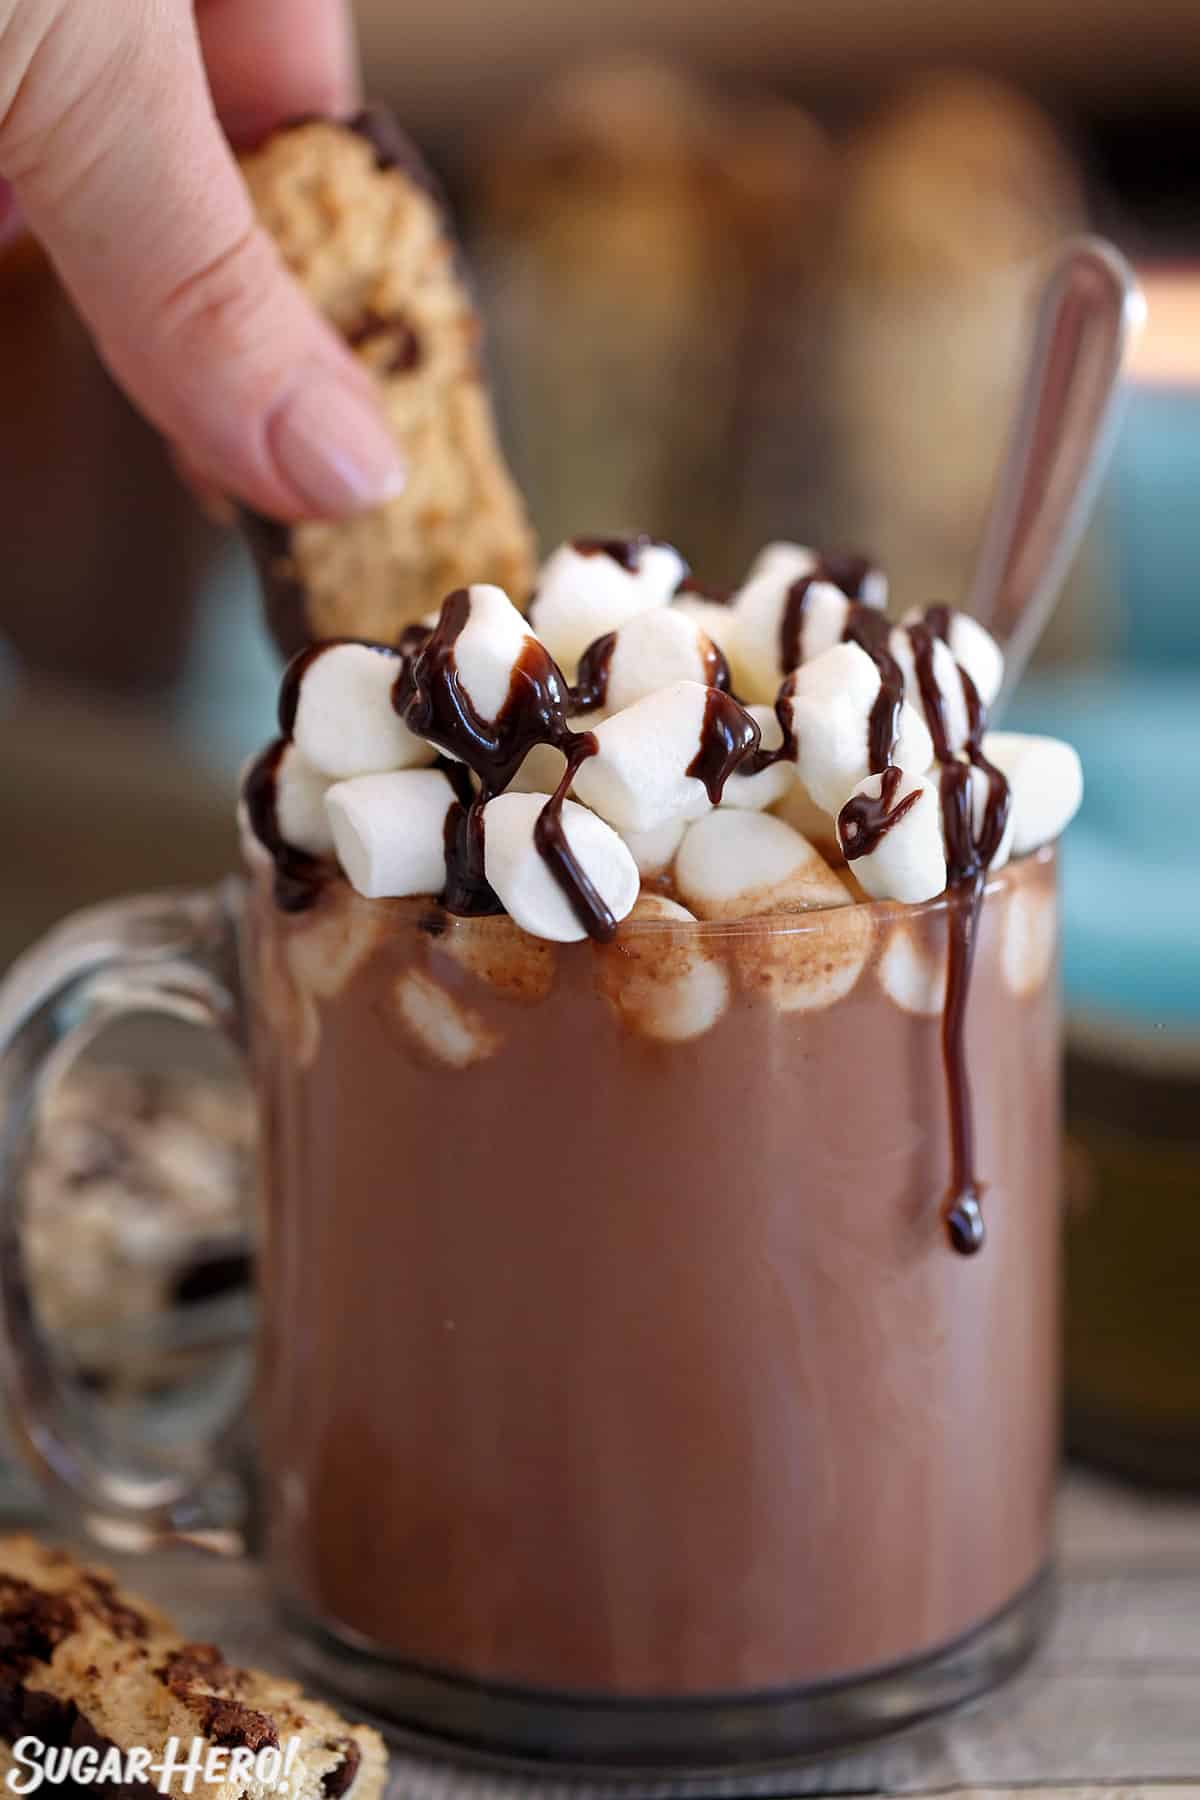 Hand dunking a cookie into Slow Cooker Hot Chocolate in a glass mug